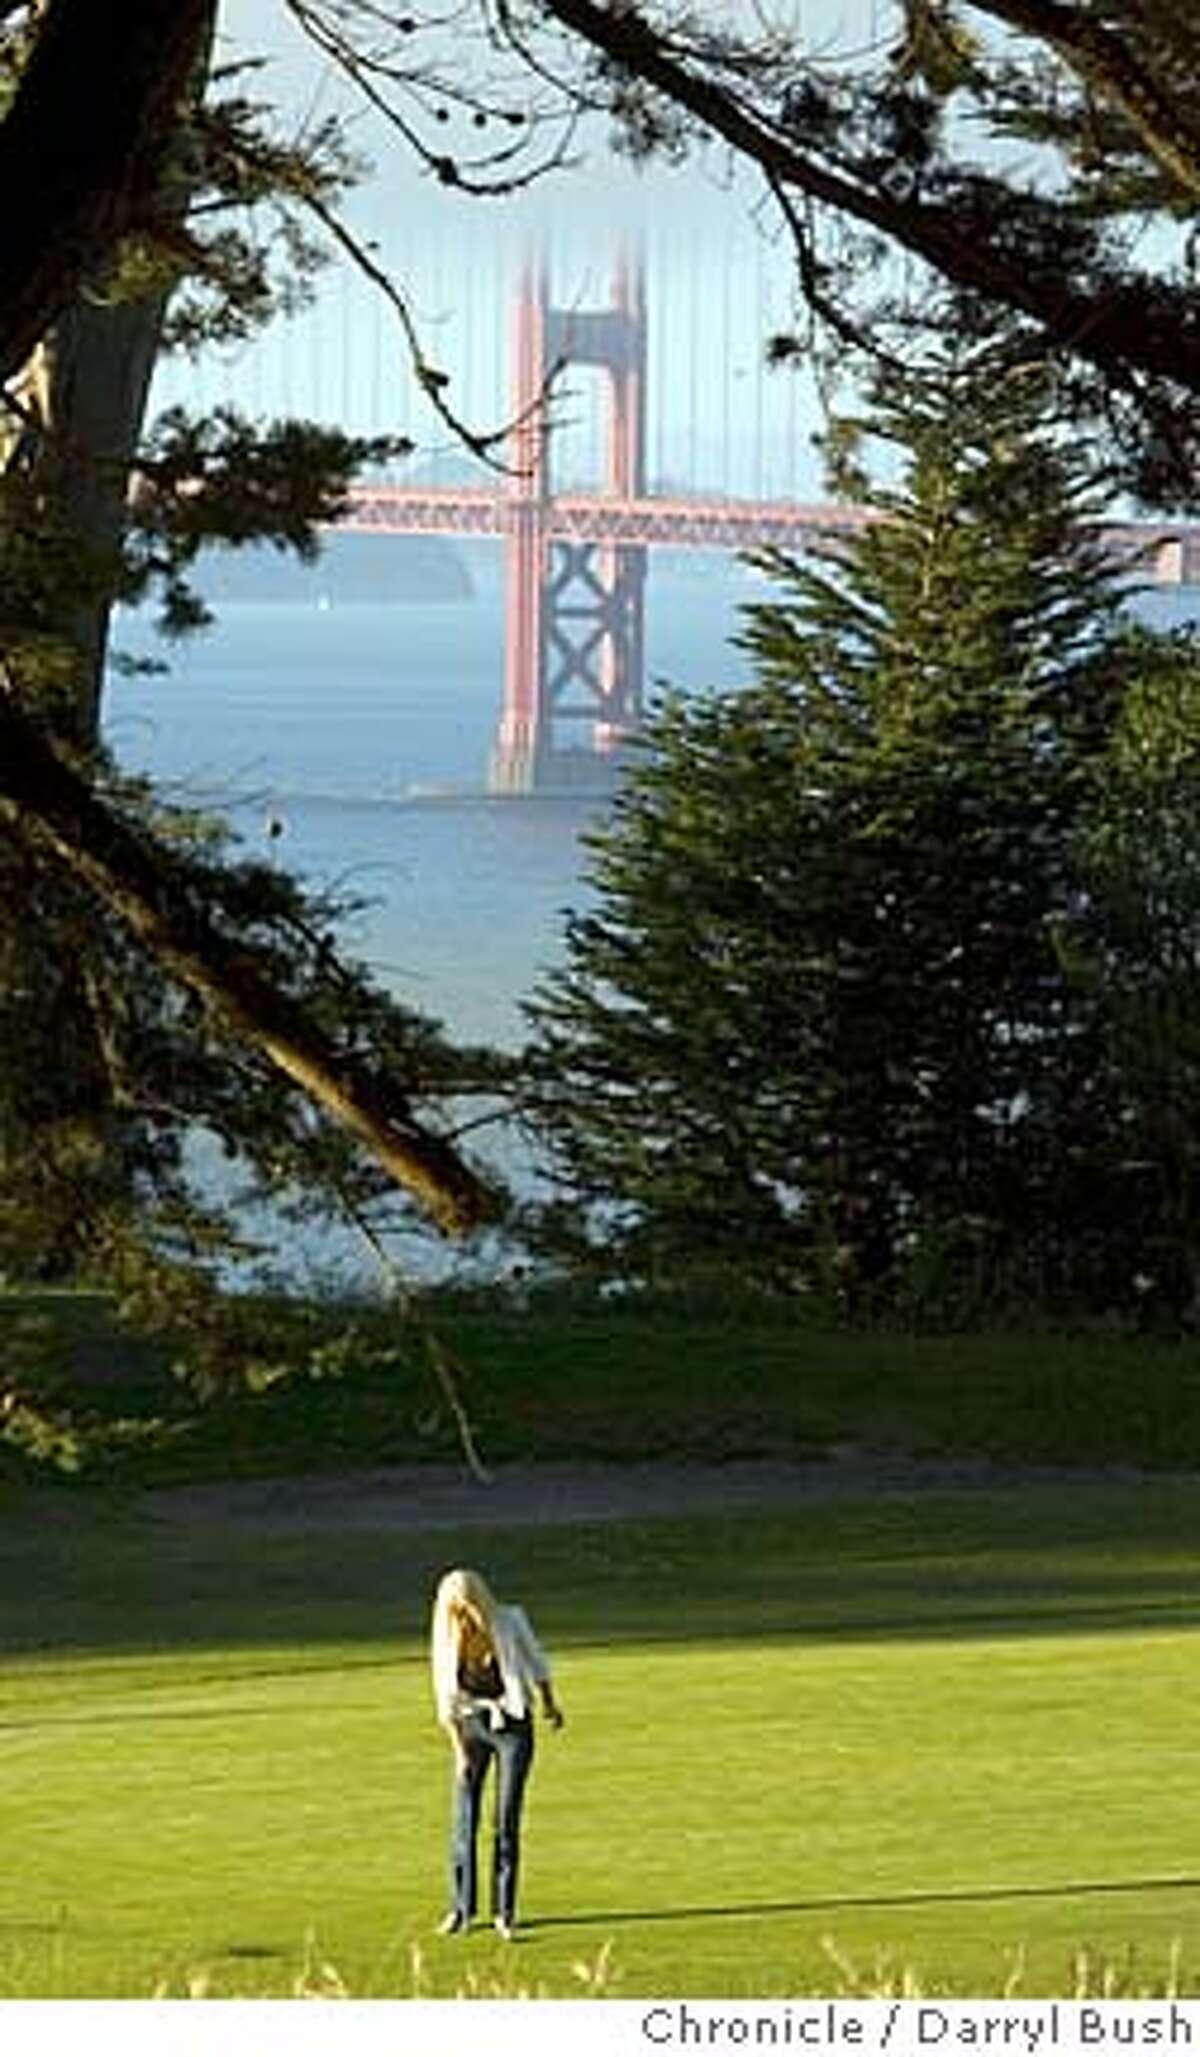 feature_0002_db.JPG Karen Stratford of San Francisco, lines up a putt on the 17th green of Lincoln Park Golf Course with the Golden Gate Bridge in the background in San Francisco, CA, on Thursday, June, 28, 2007. photo taken: 6/28/07 Darryl Bush / The Chronicle ** (cq) Ran on: 06-29-2007 Karen Stratford of San Francisco lines up a putt on the scenic 17th green of Lincoln Park Golf Course. MANDATORY CREDIT FOR PHOTOG AND SF CHRONICLE/NO SALES-MAGS OUT